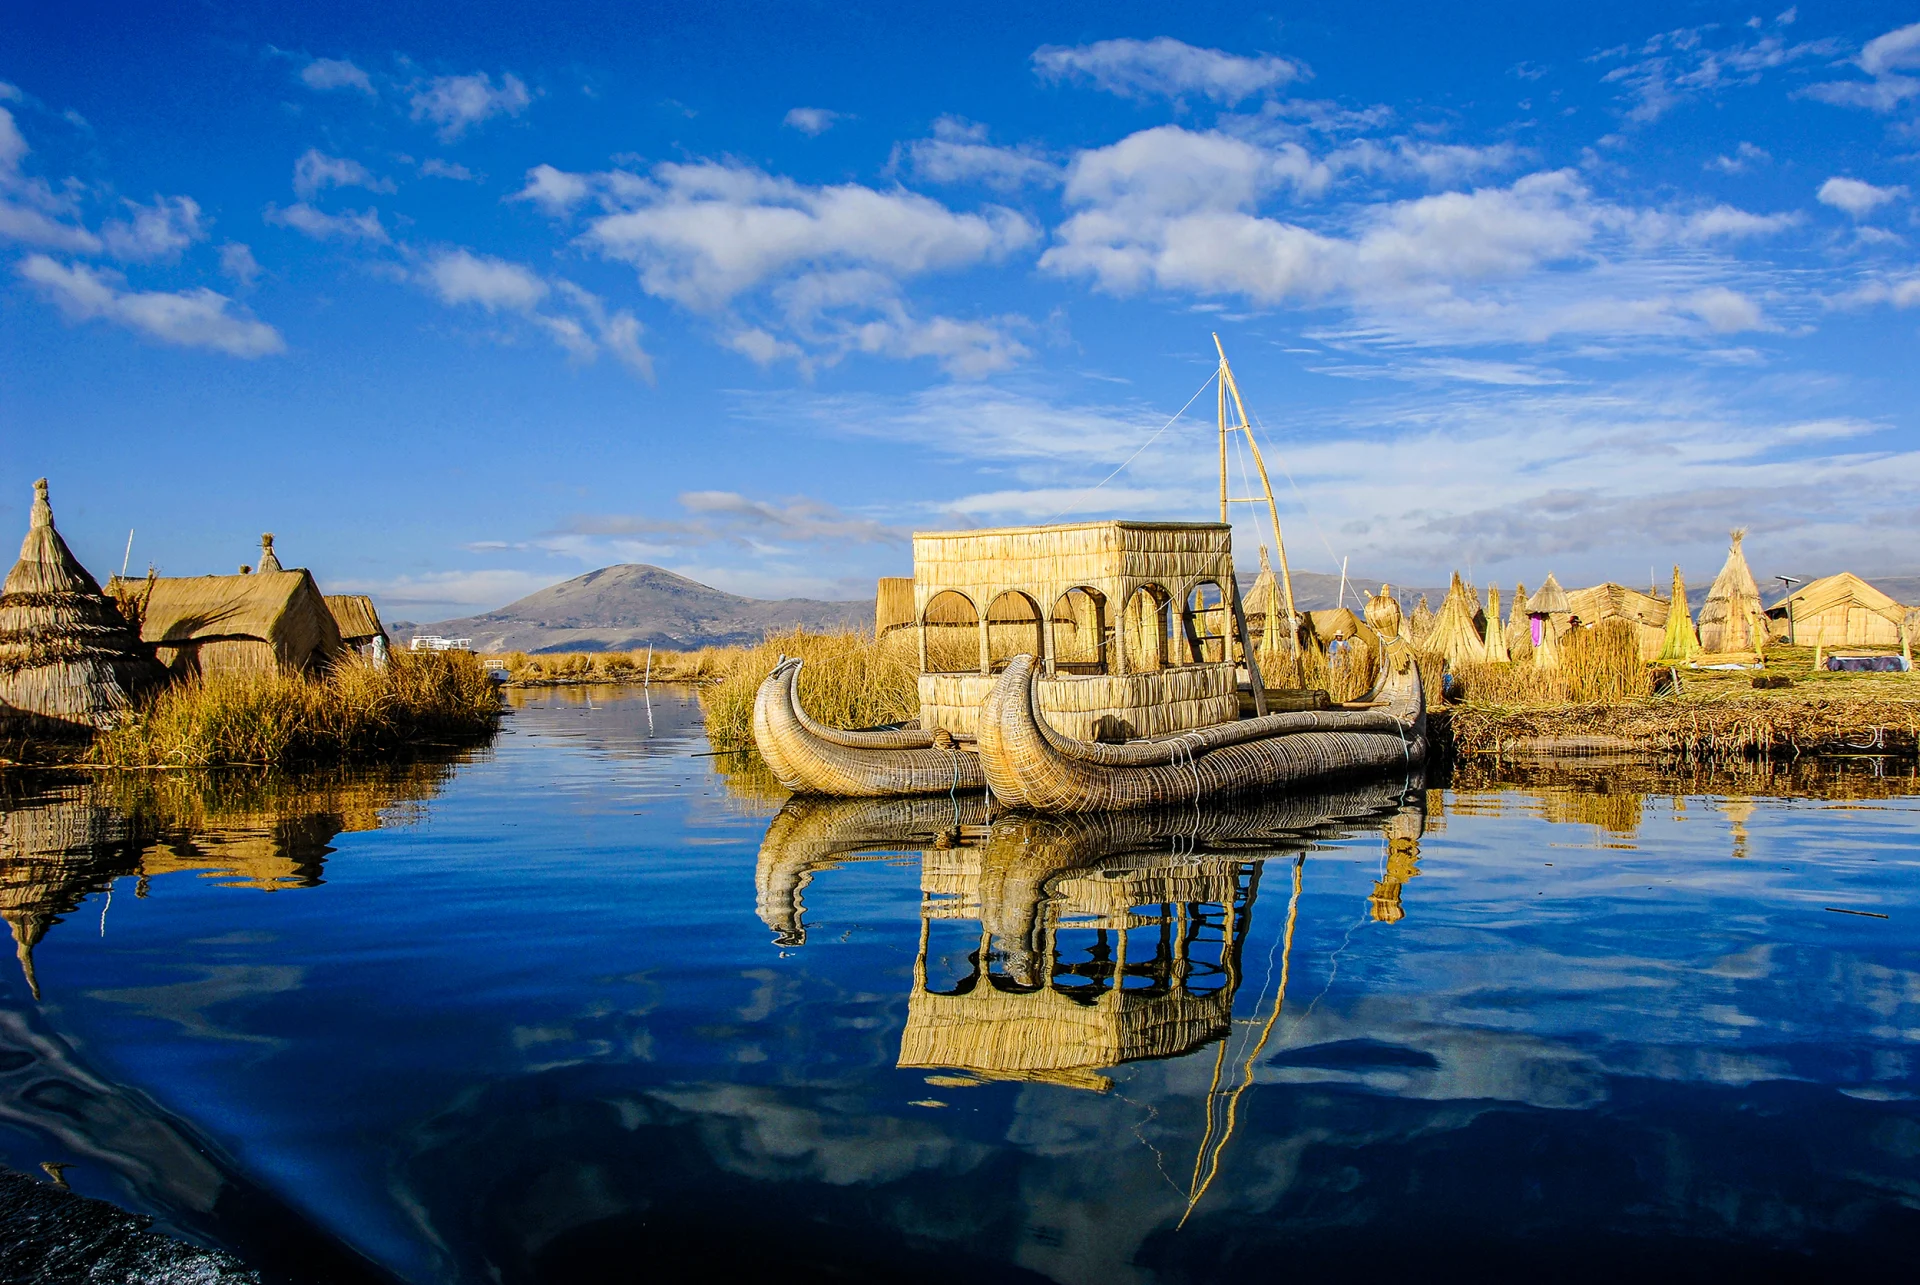 Diverse Cultures of South America with Lake Titicaca